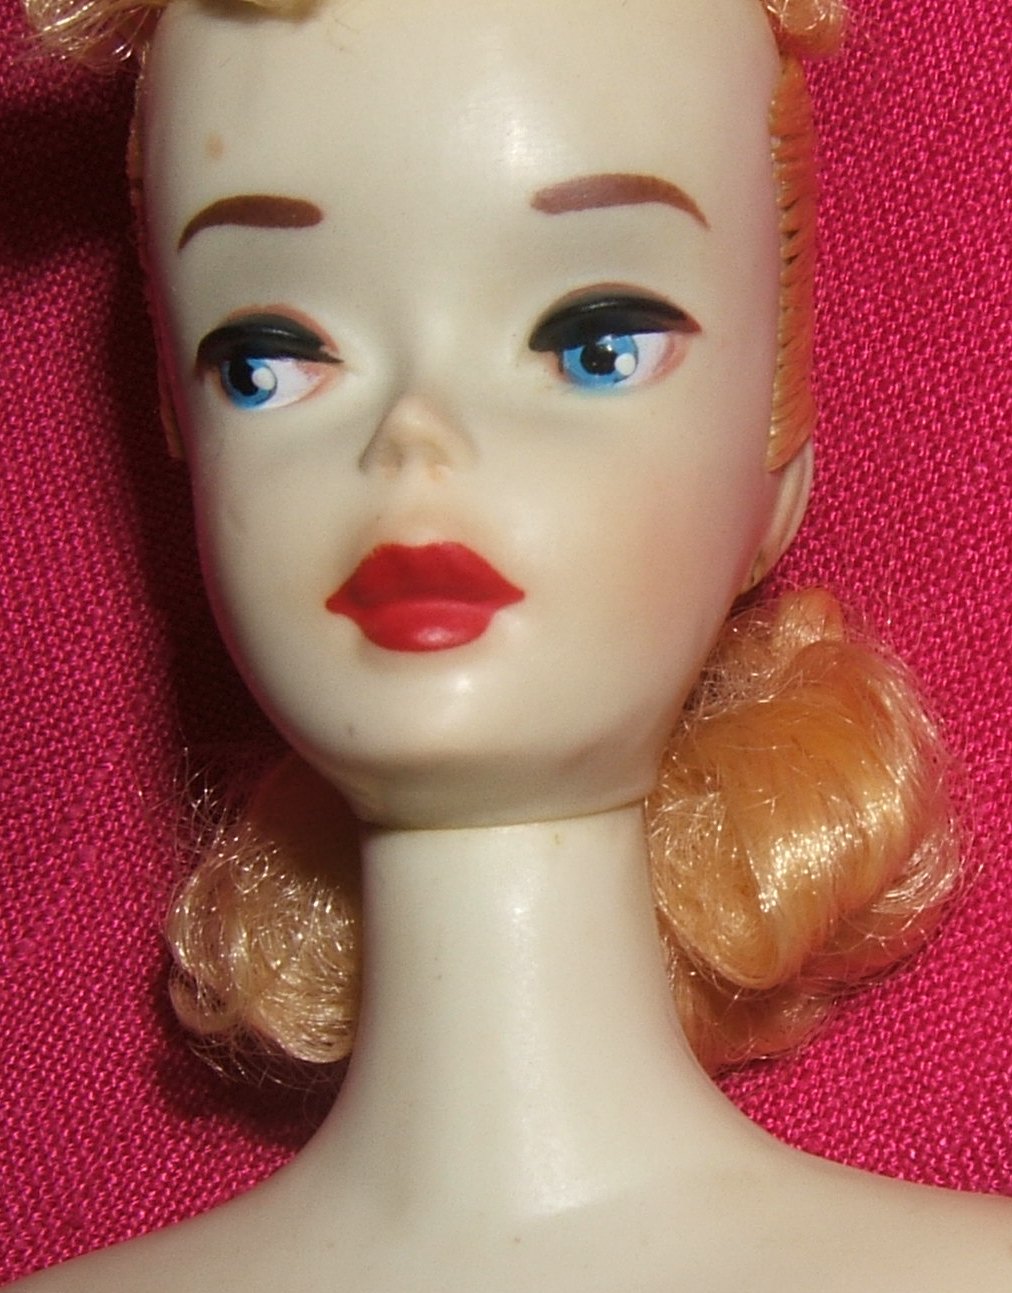 classic barbie dolls for sale